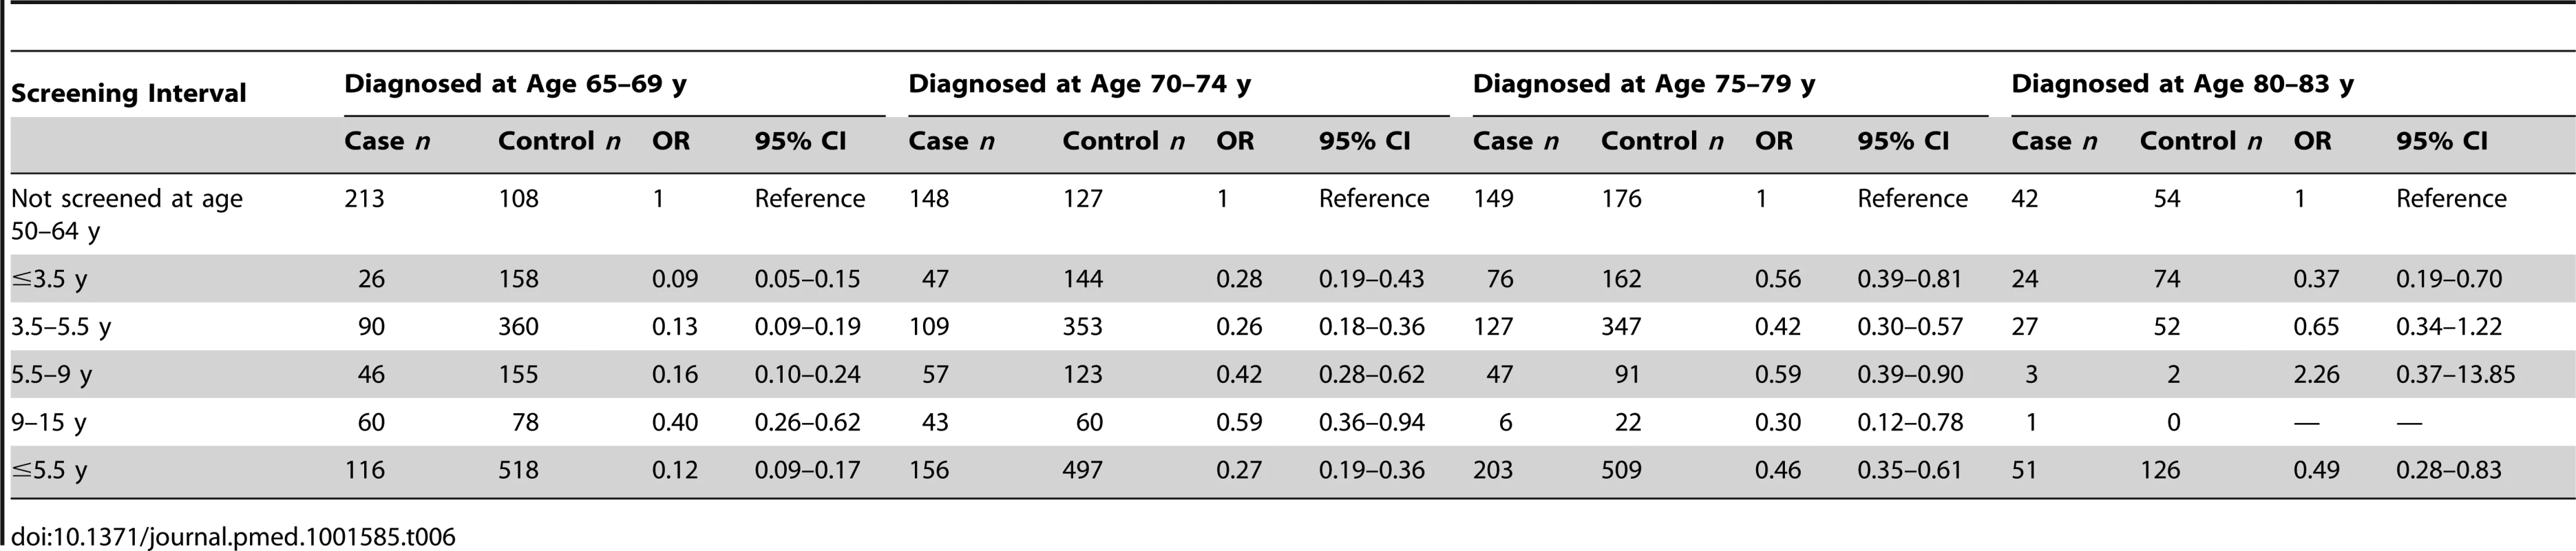 Odds ratios of cervical cancer by maximum screening interval at age 50–64 y relative to no screening, by age at diagnosis.